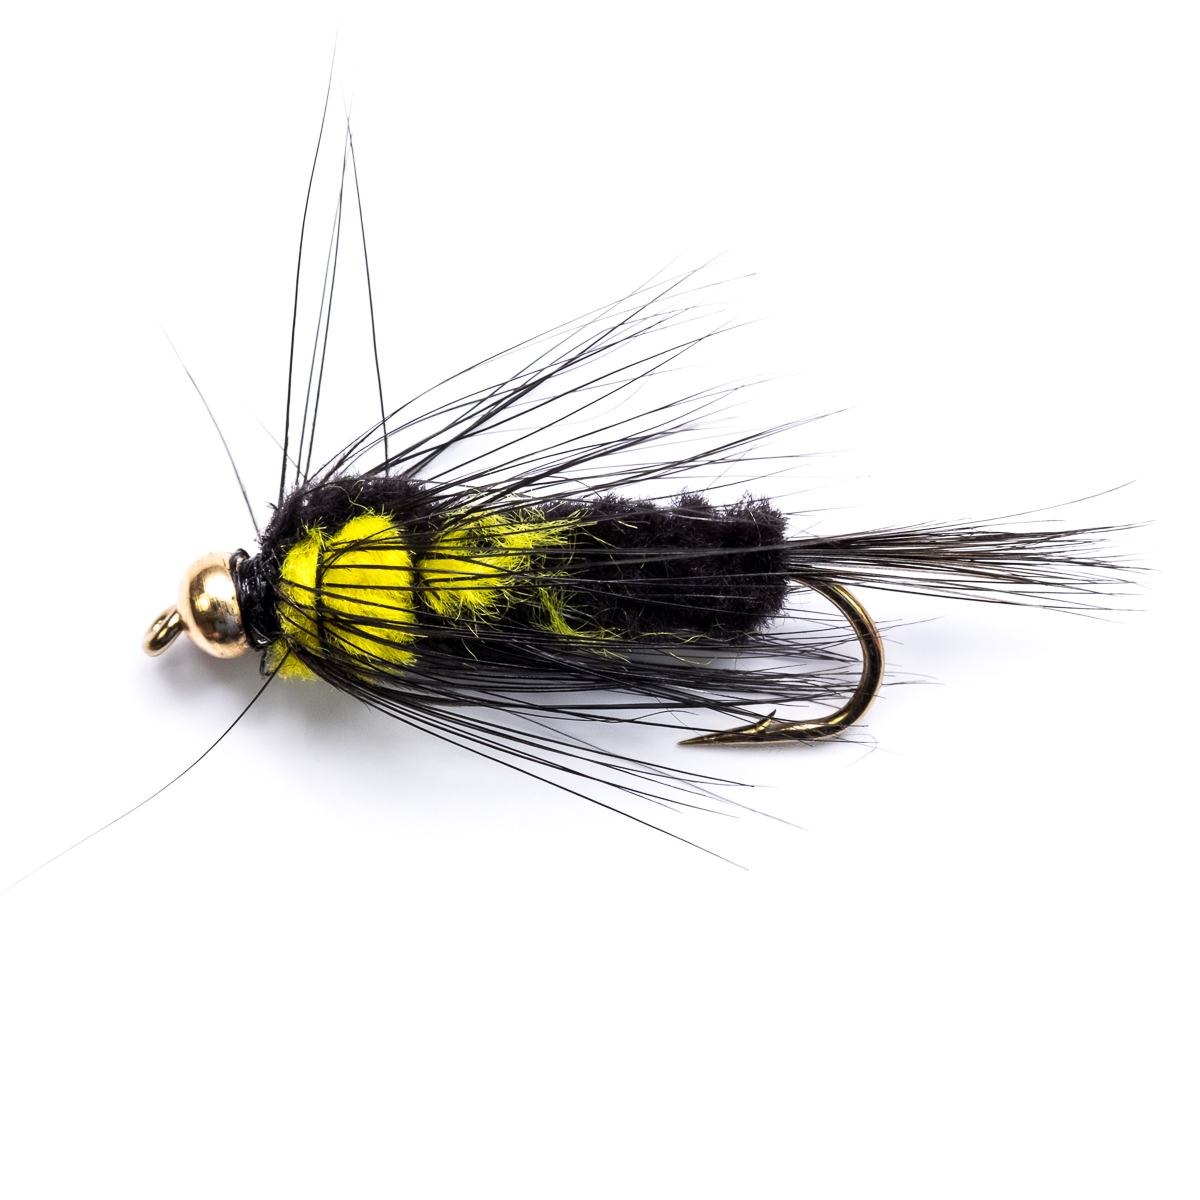 18 Montana Stonefly Nymphs Long Shank Trout Fly Fishing Flies by Dragonflies